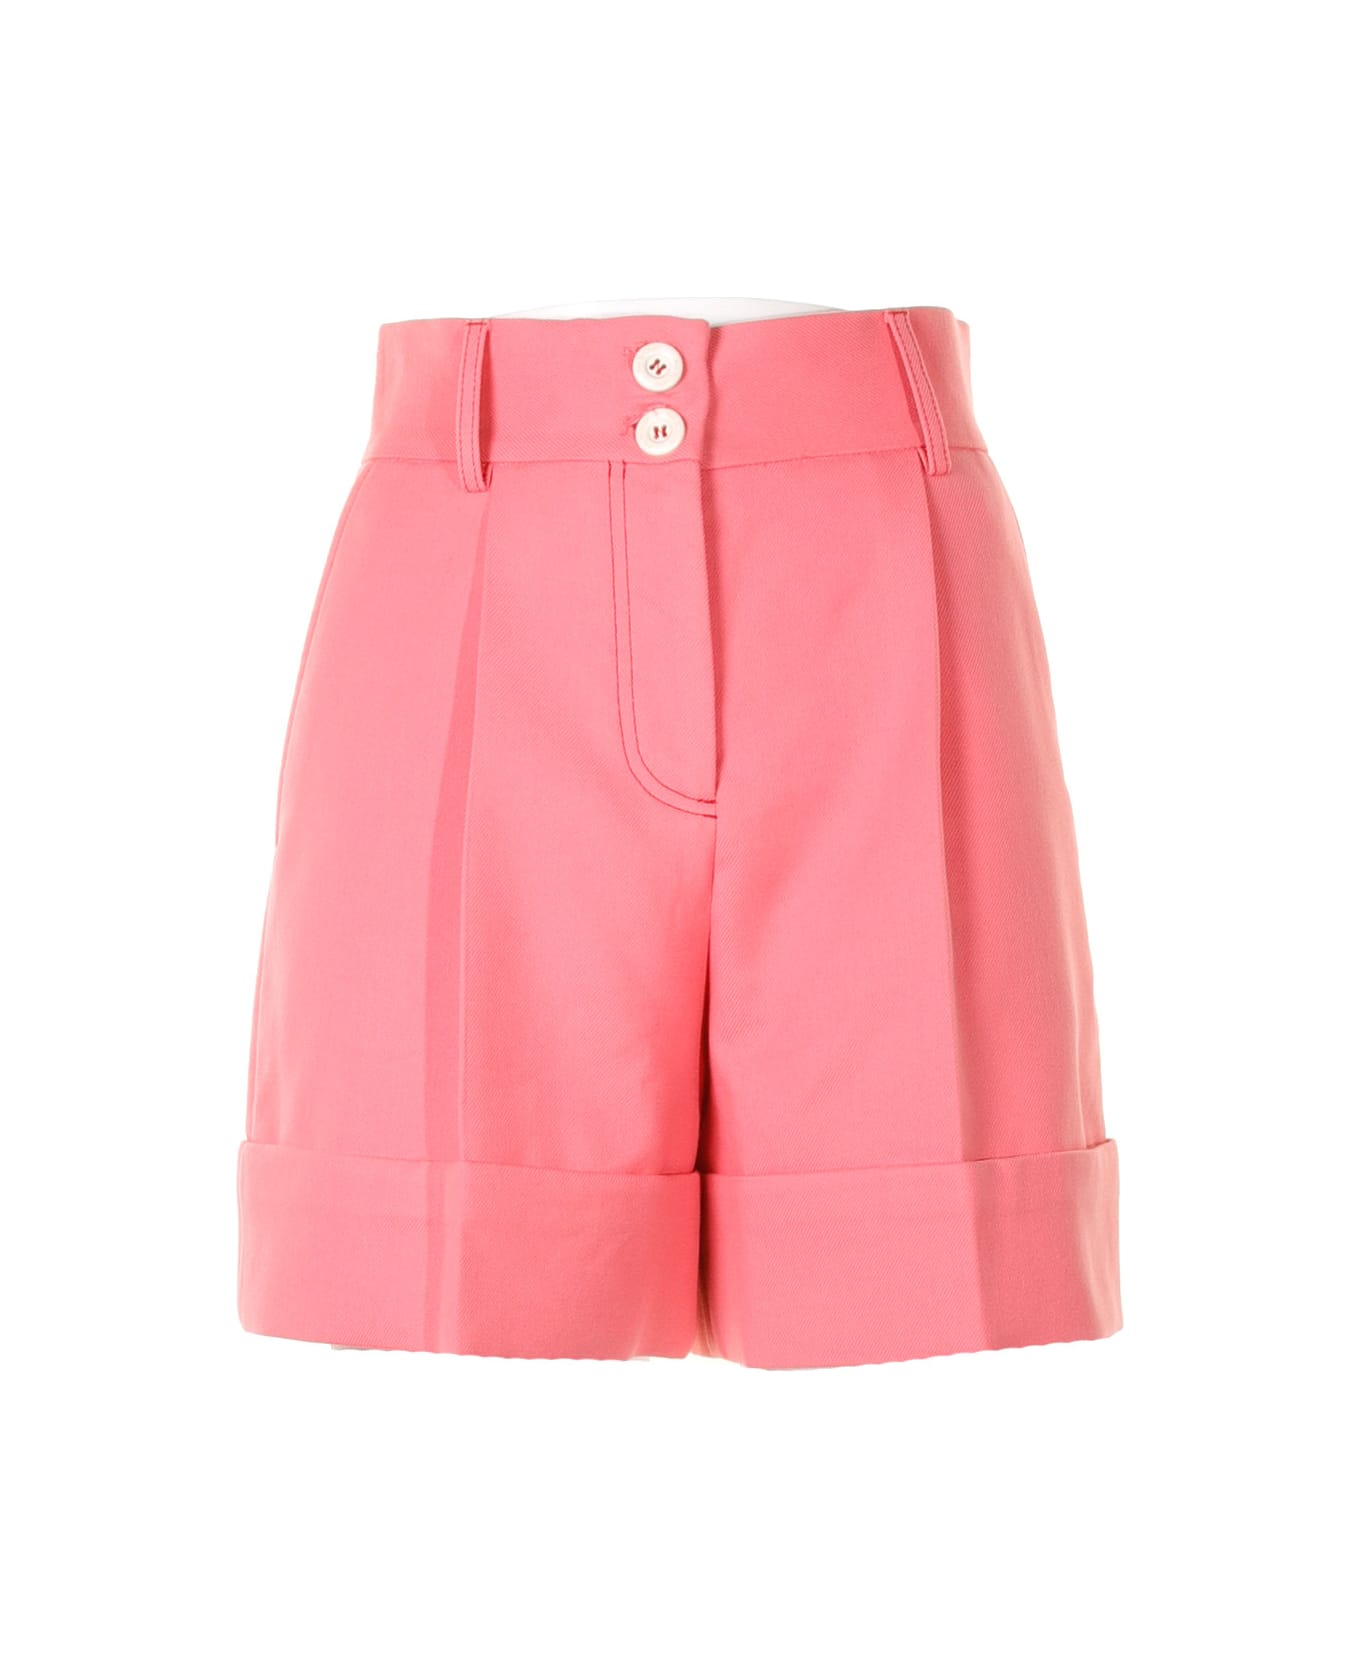 See by Chloé Pink High-waisted Shorts - SUNSET PINK ショートパンツ